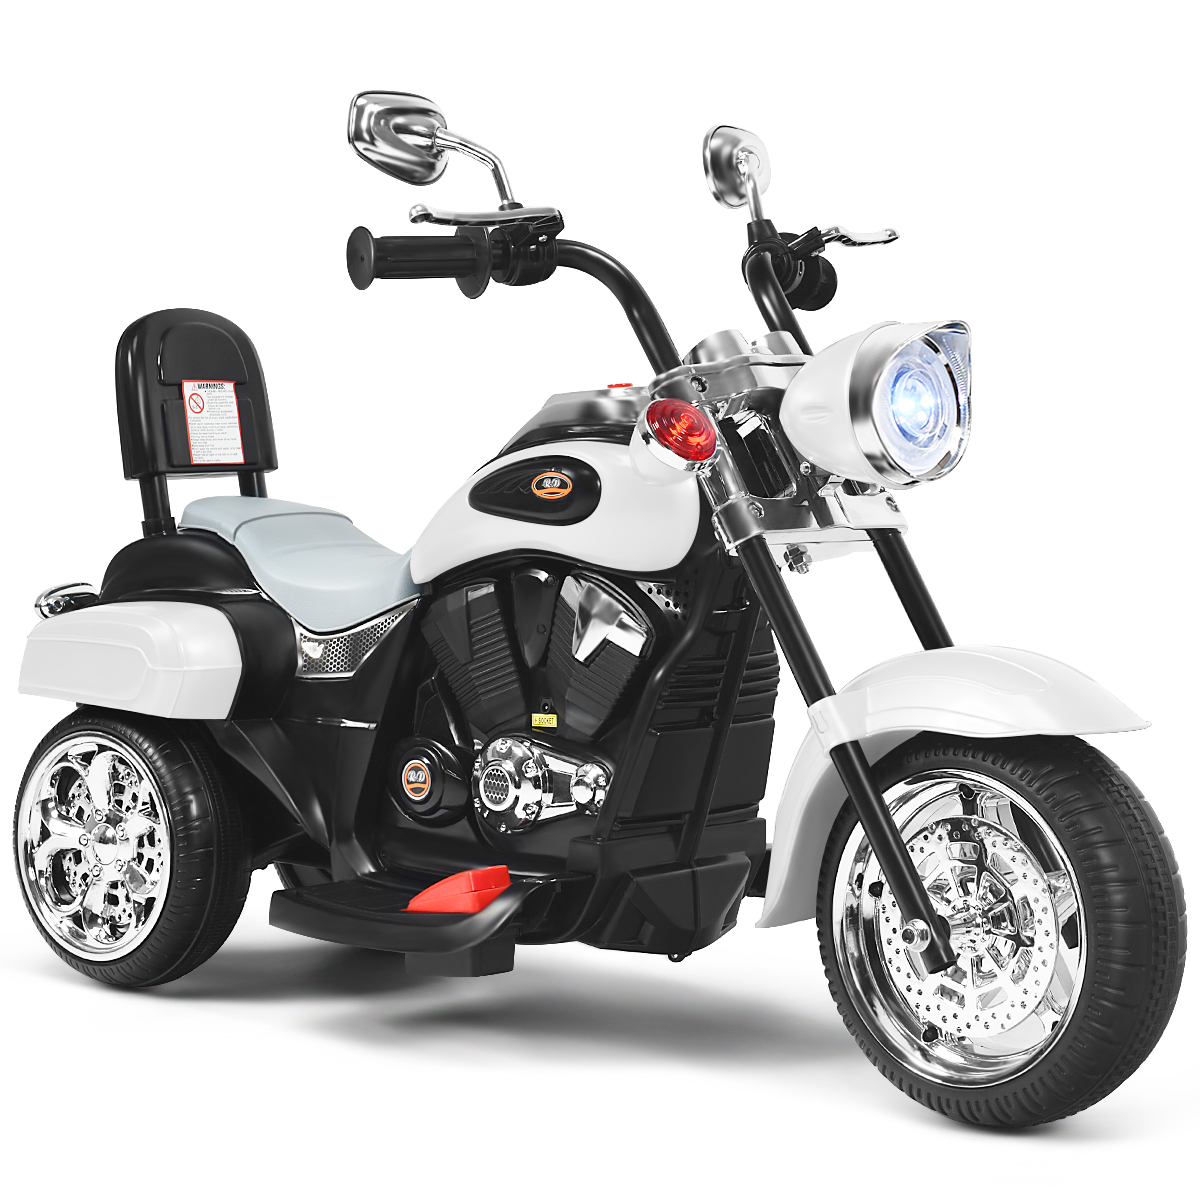 Costway 3 Wheel Kids Ride On Motorcycle 6V Battery Powered Electric Toy White - image 1 of 7